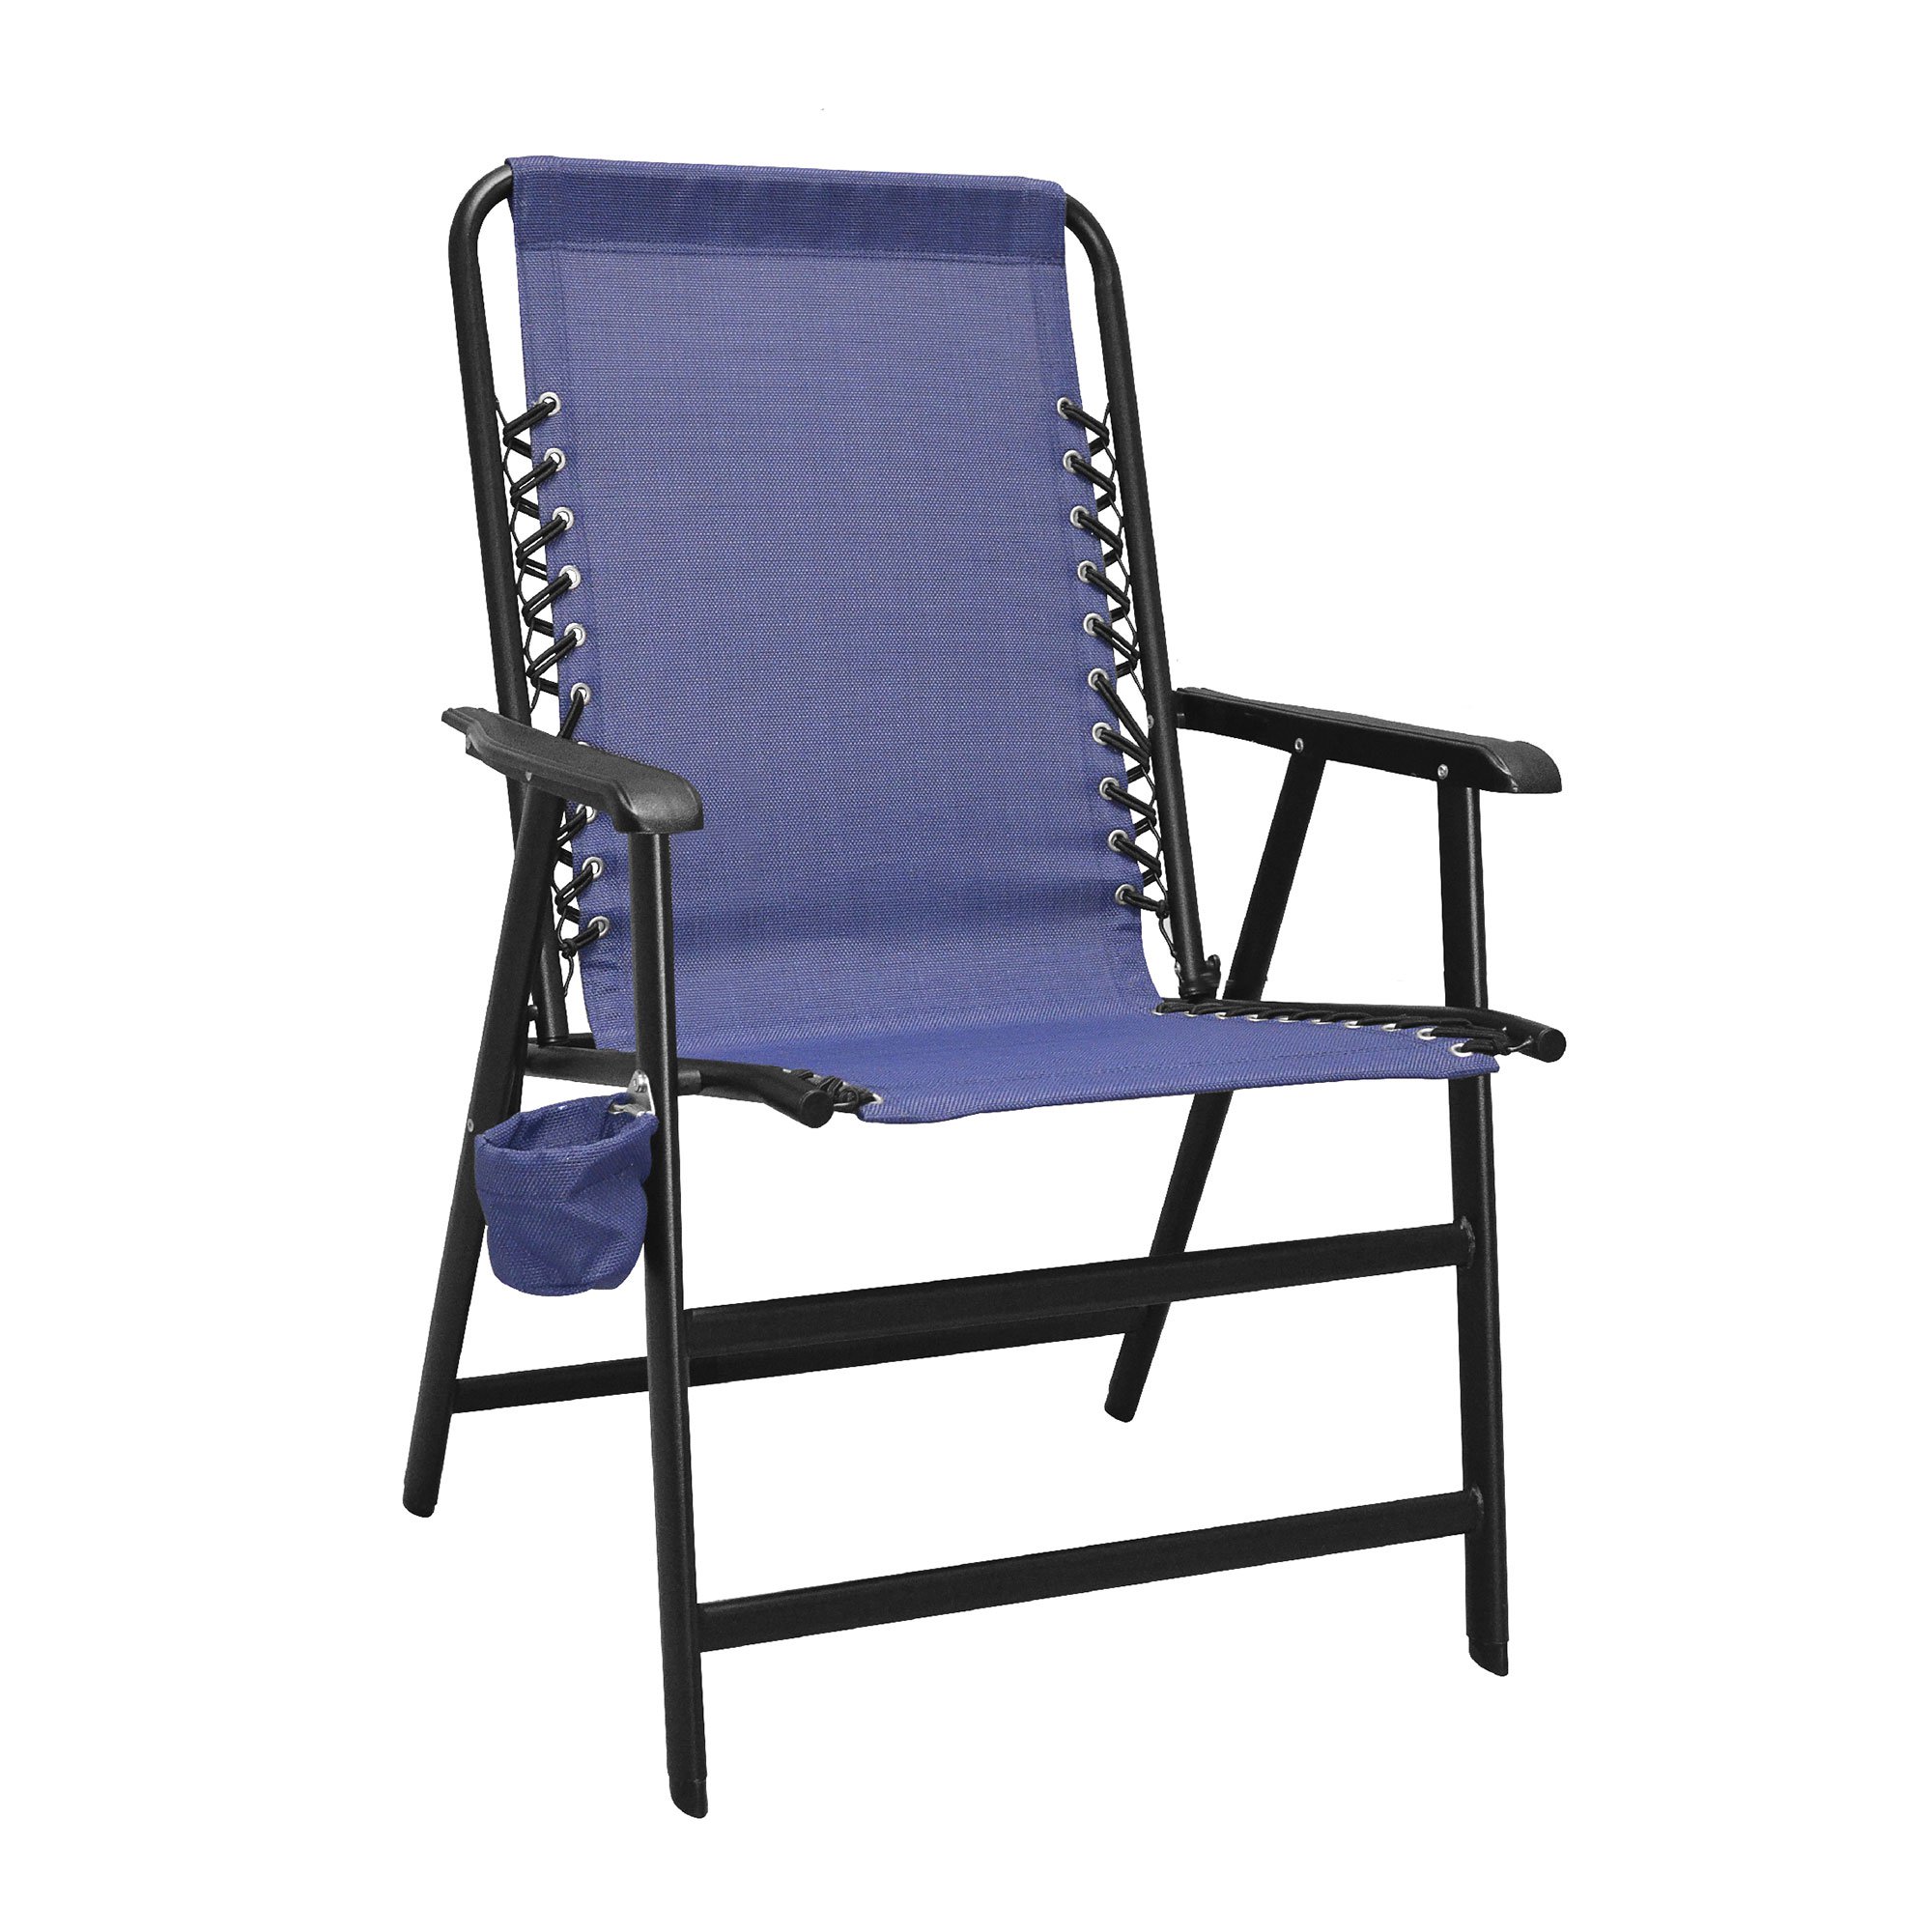 Caravan Canopy Infinity Suspension Folding Chair with Cupholder, Blue (2 Pack) - image 3 of 5